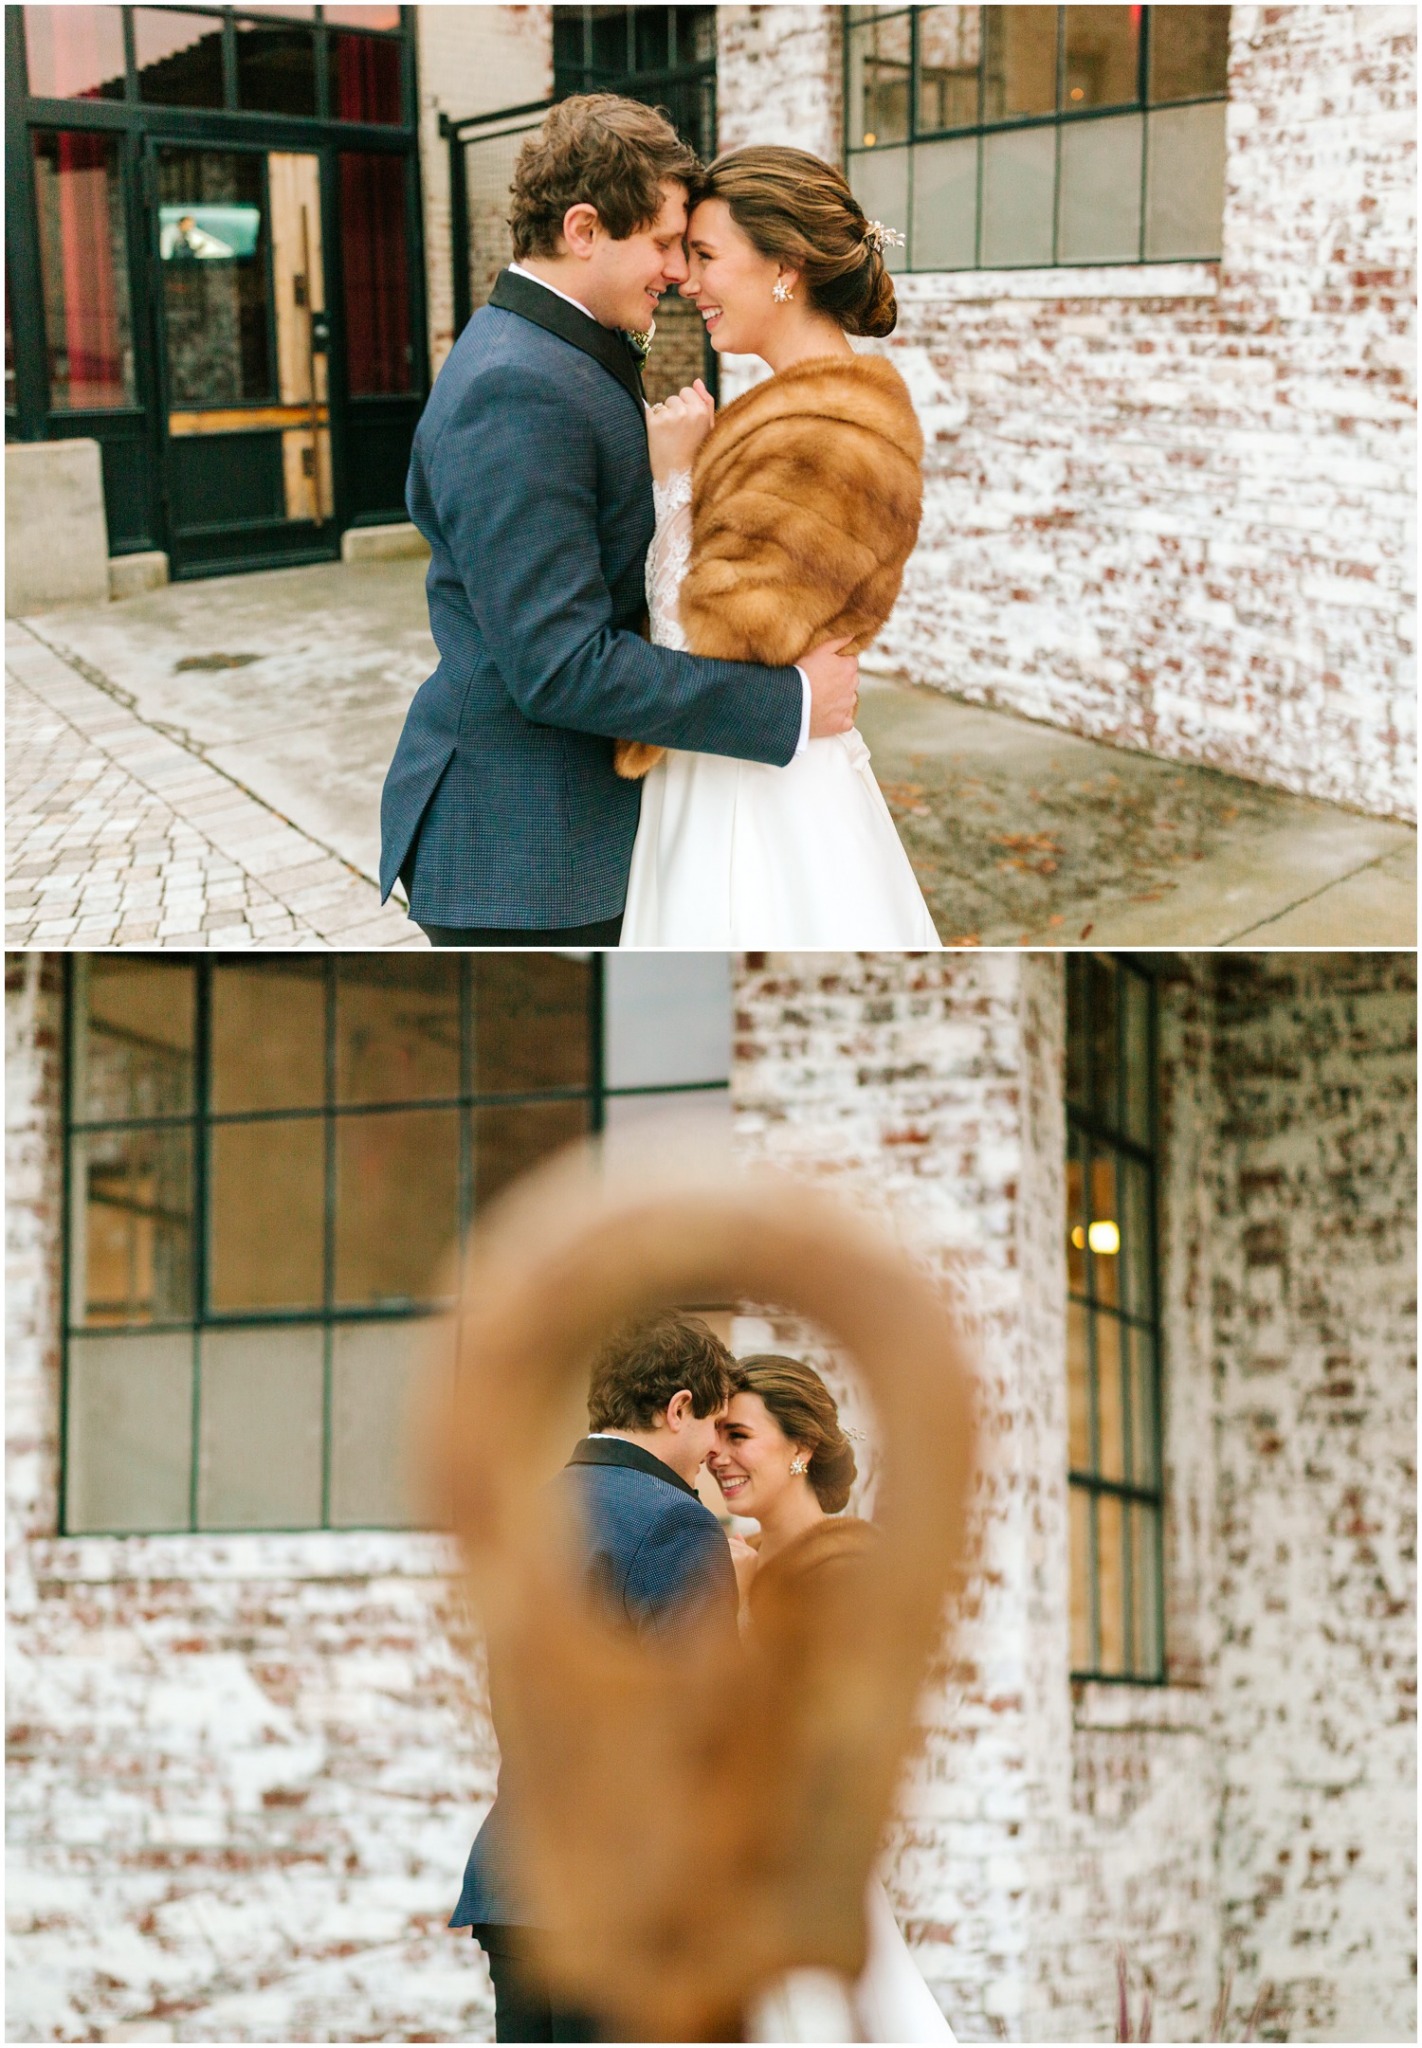 romantic winter wedding portraits of newlyweds by Chelsea Renay Photography